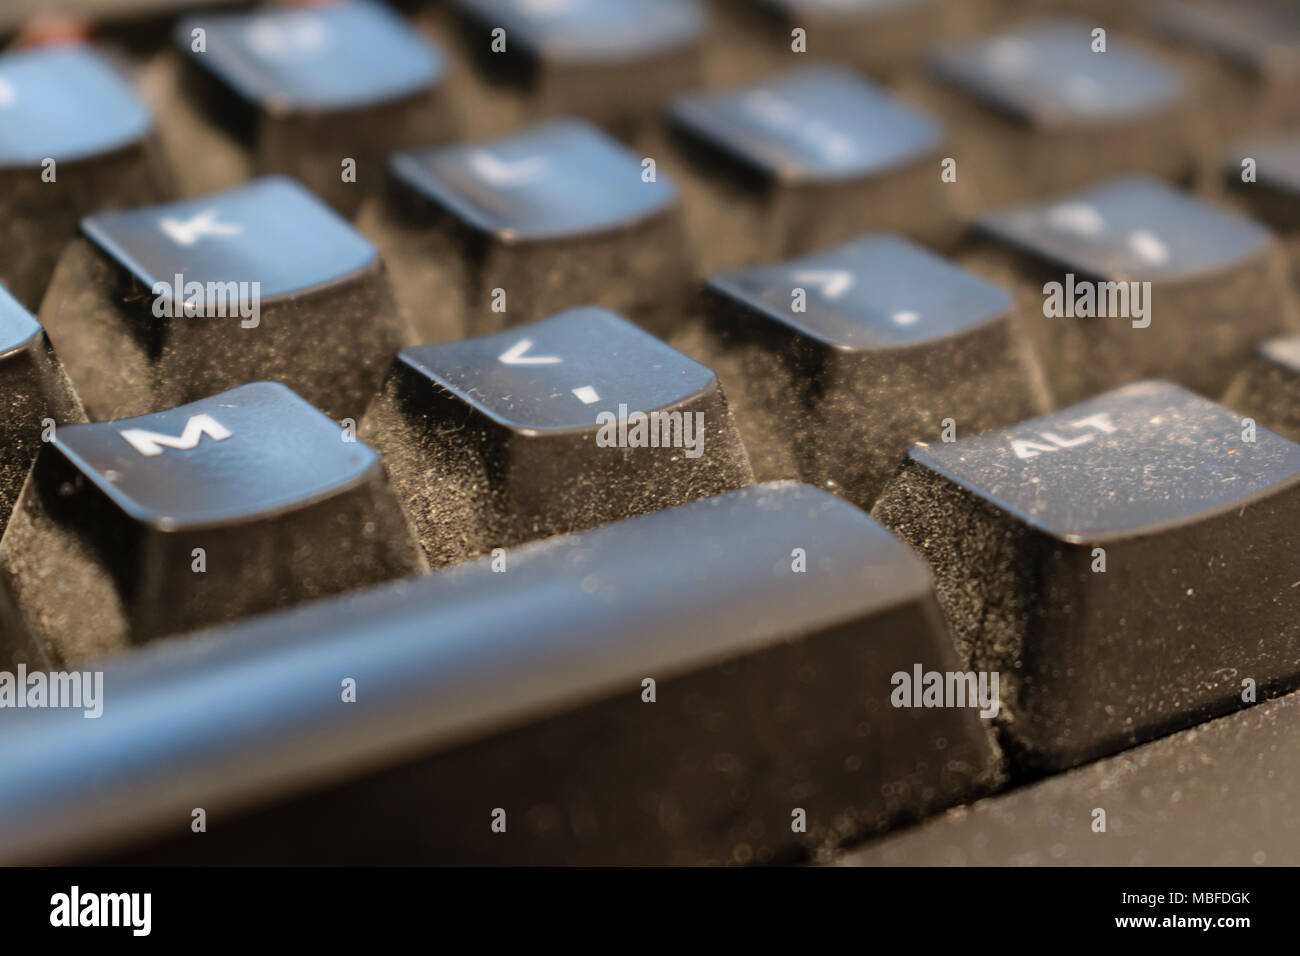 Dirty Keyboard High Resolution Stock Photography and Images - Alamy